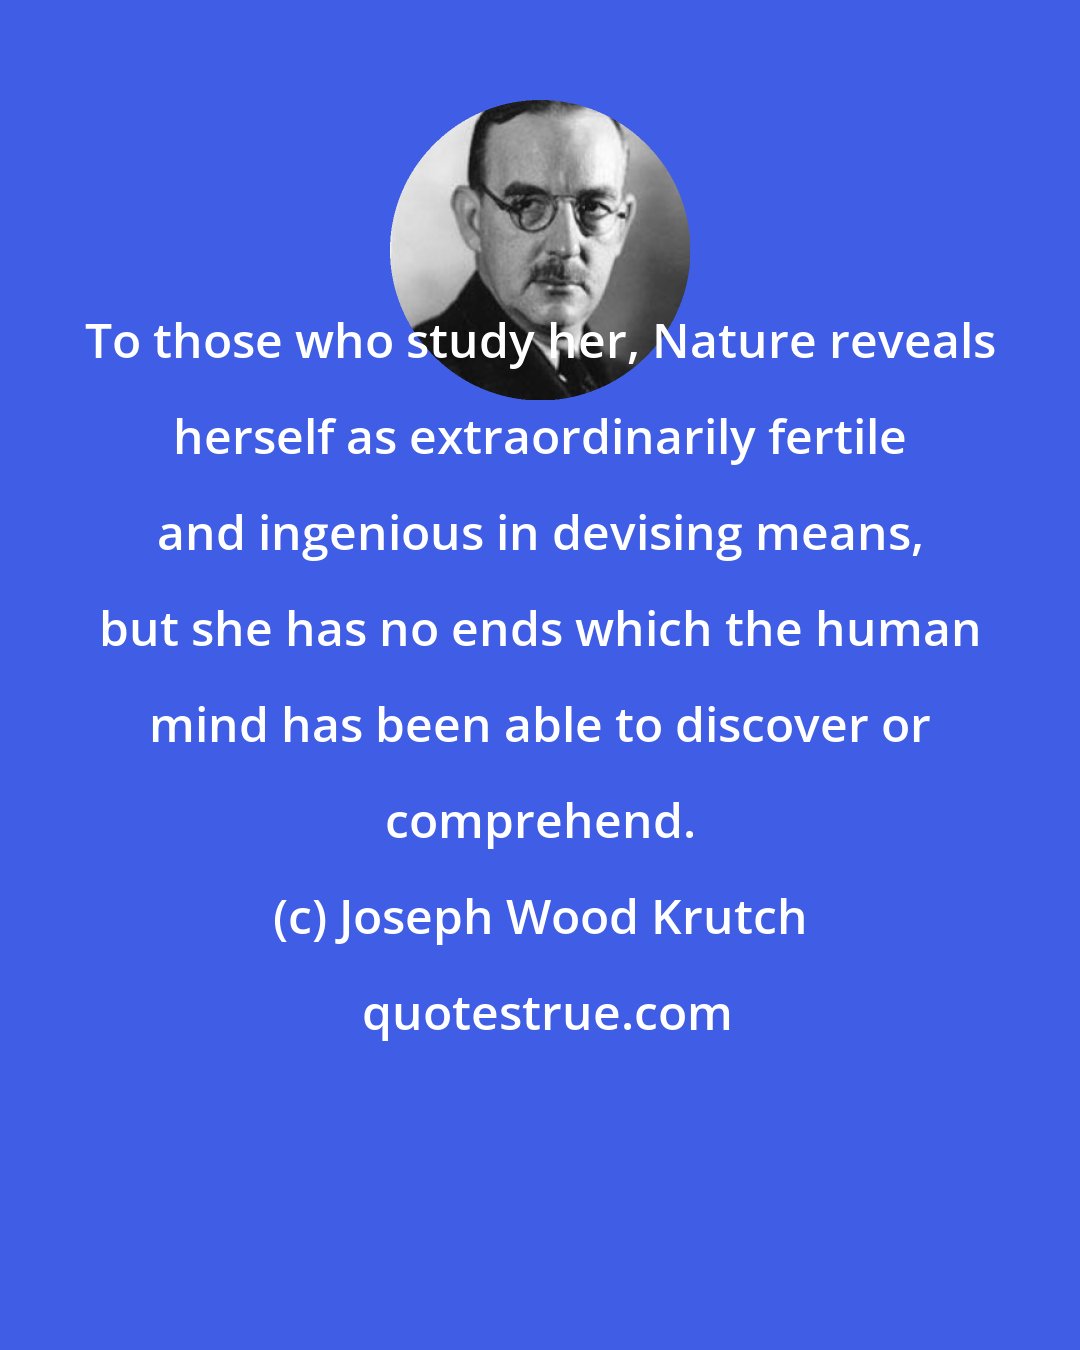 Joseph Wood Krutch: To those who study her, Nature reveals herself as extraordinarily fertile and ingenious in devising means, but she has no ends which the human mind has been able to discover or comprehend.